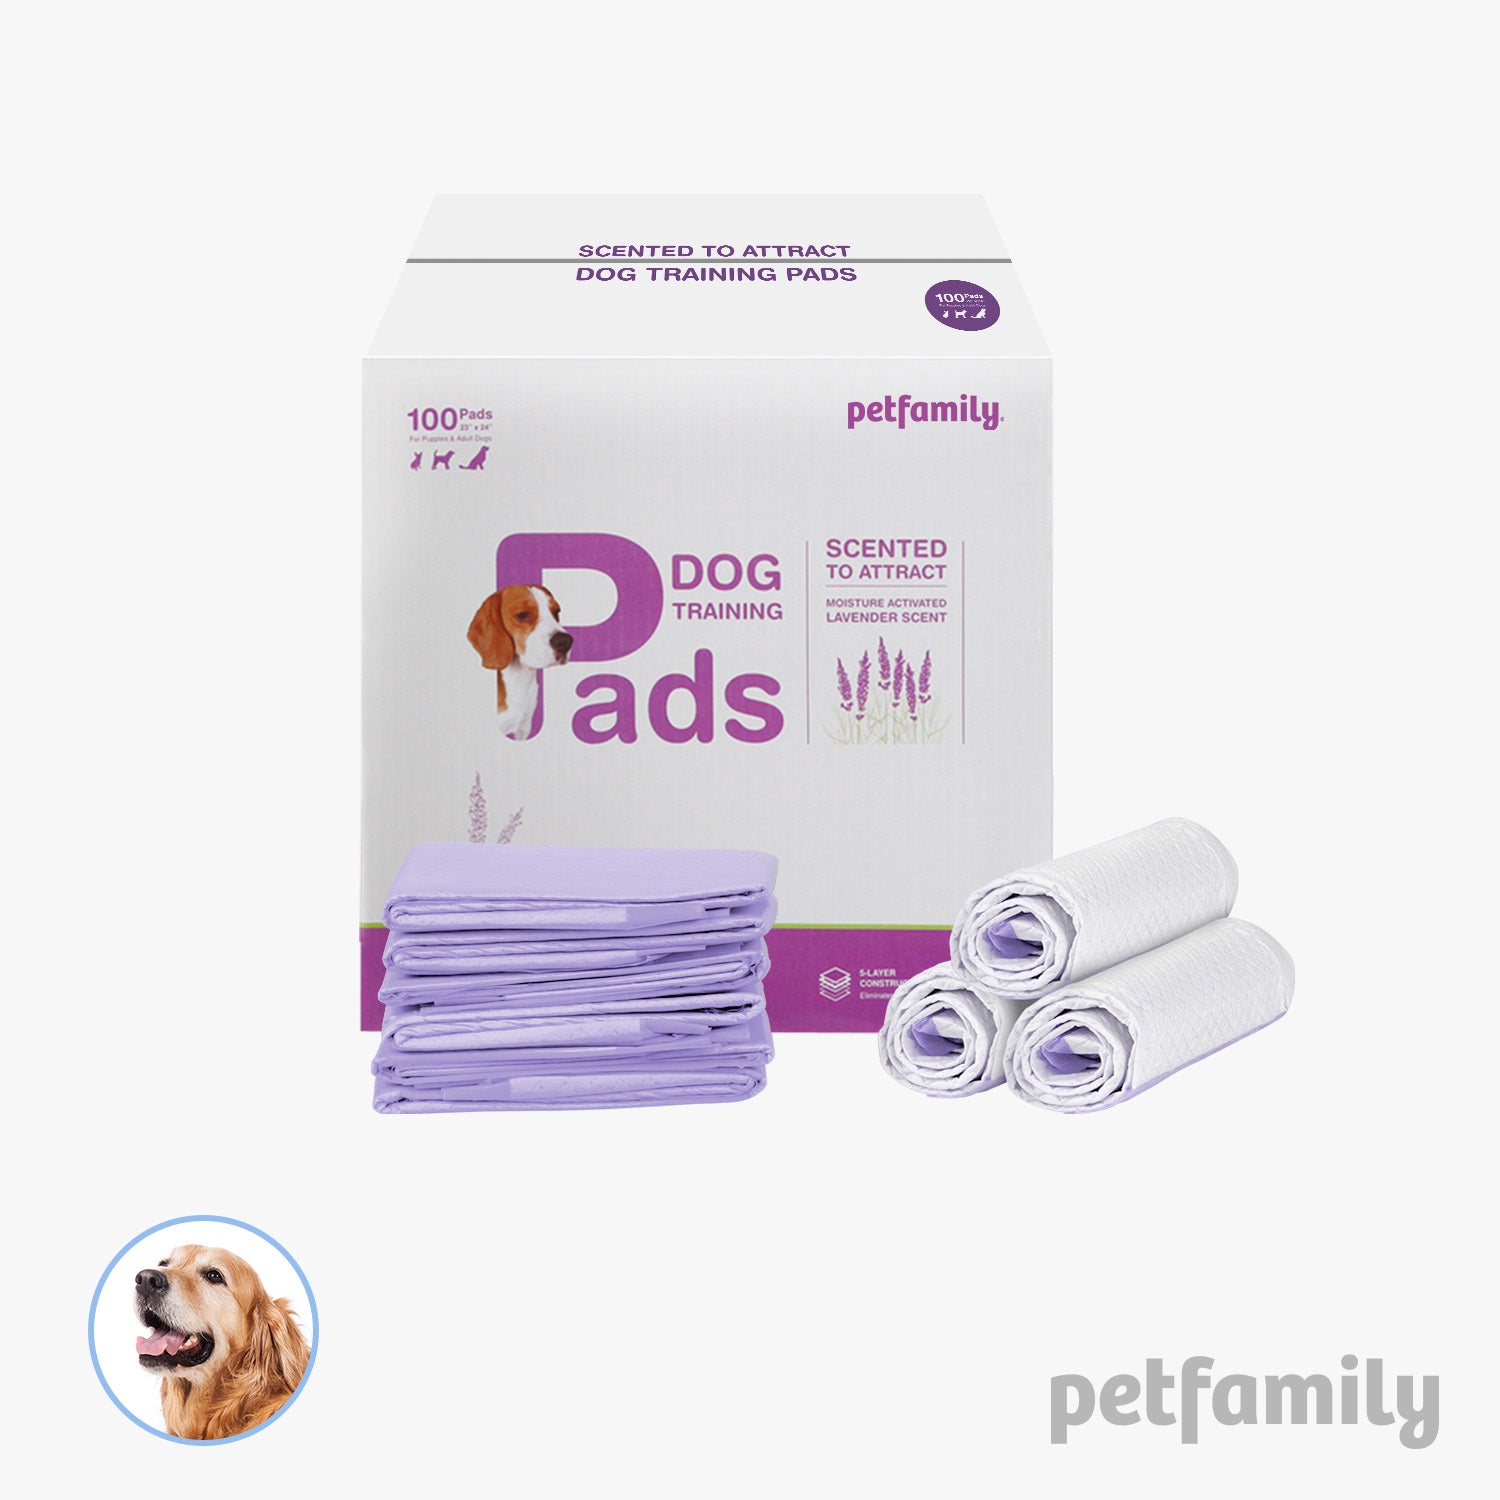 Dog Training Pads 23" x 24", Lavender Scent - 100 Pieces - Quick Drying and Ultra Absorbent